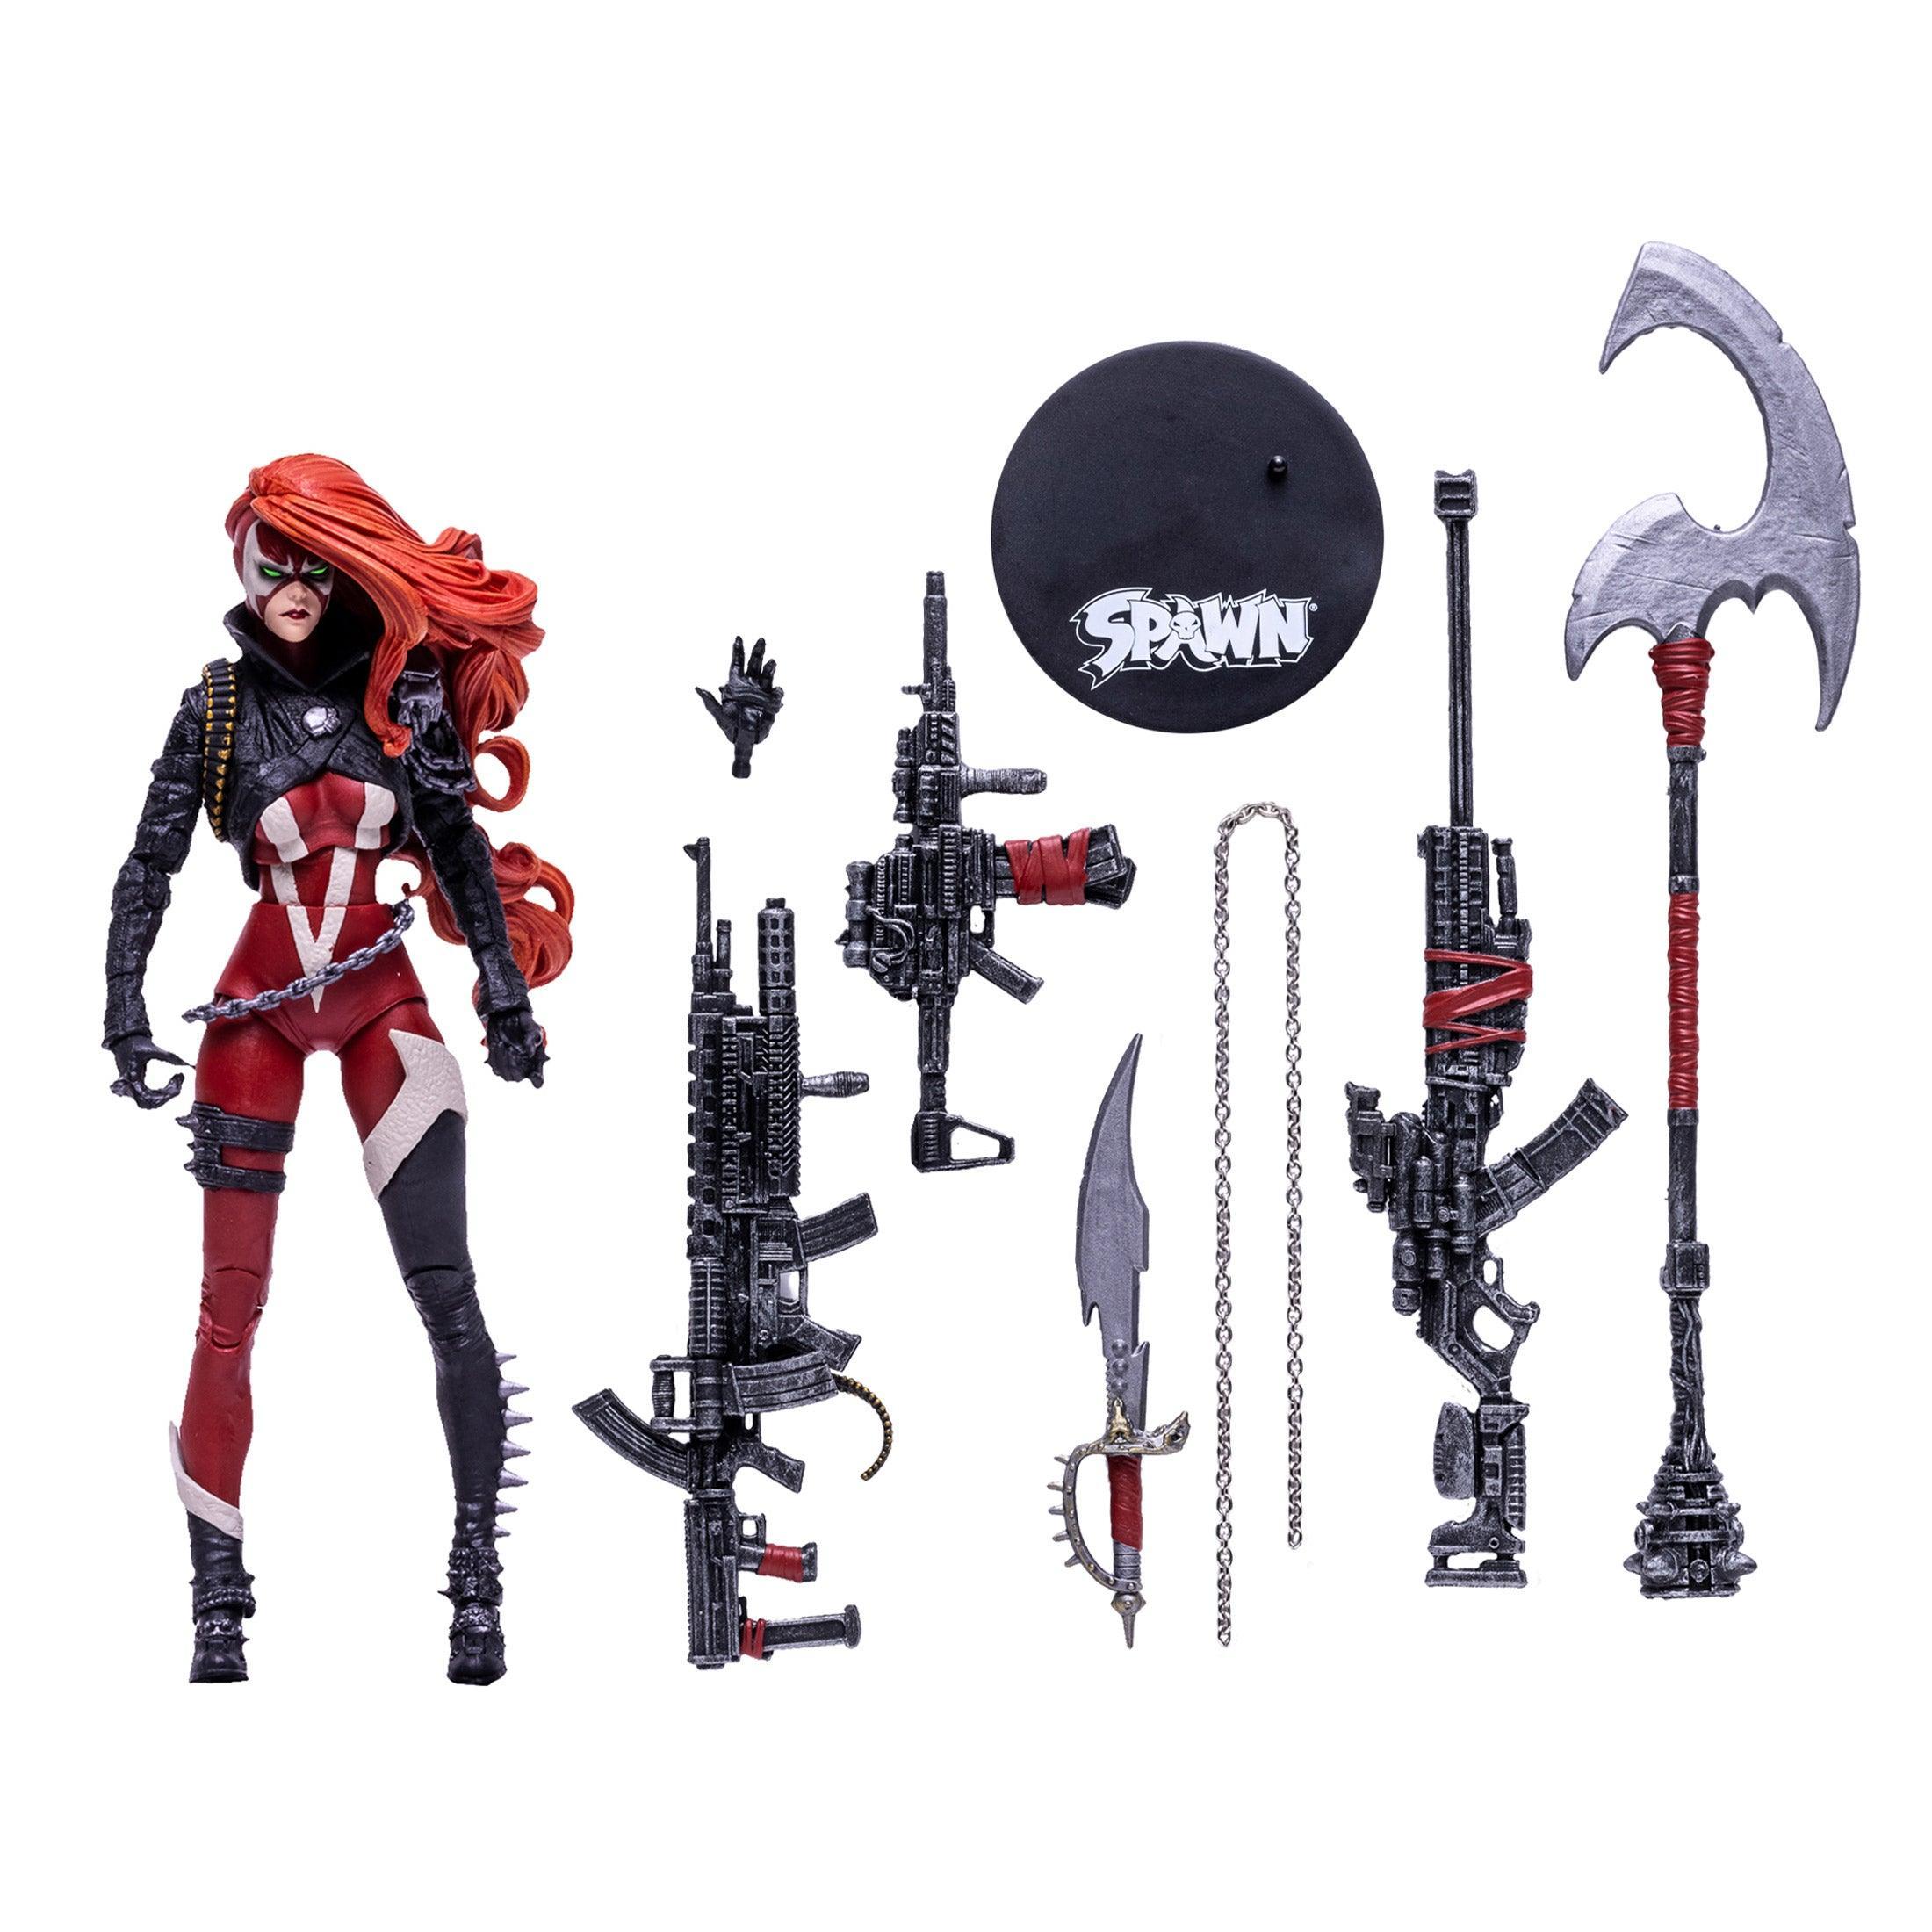 SPAWN 7IN SCALE SHE SPAWN DLX AF - Kings Comics